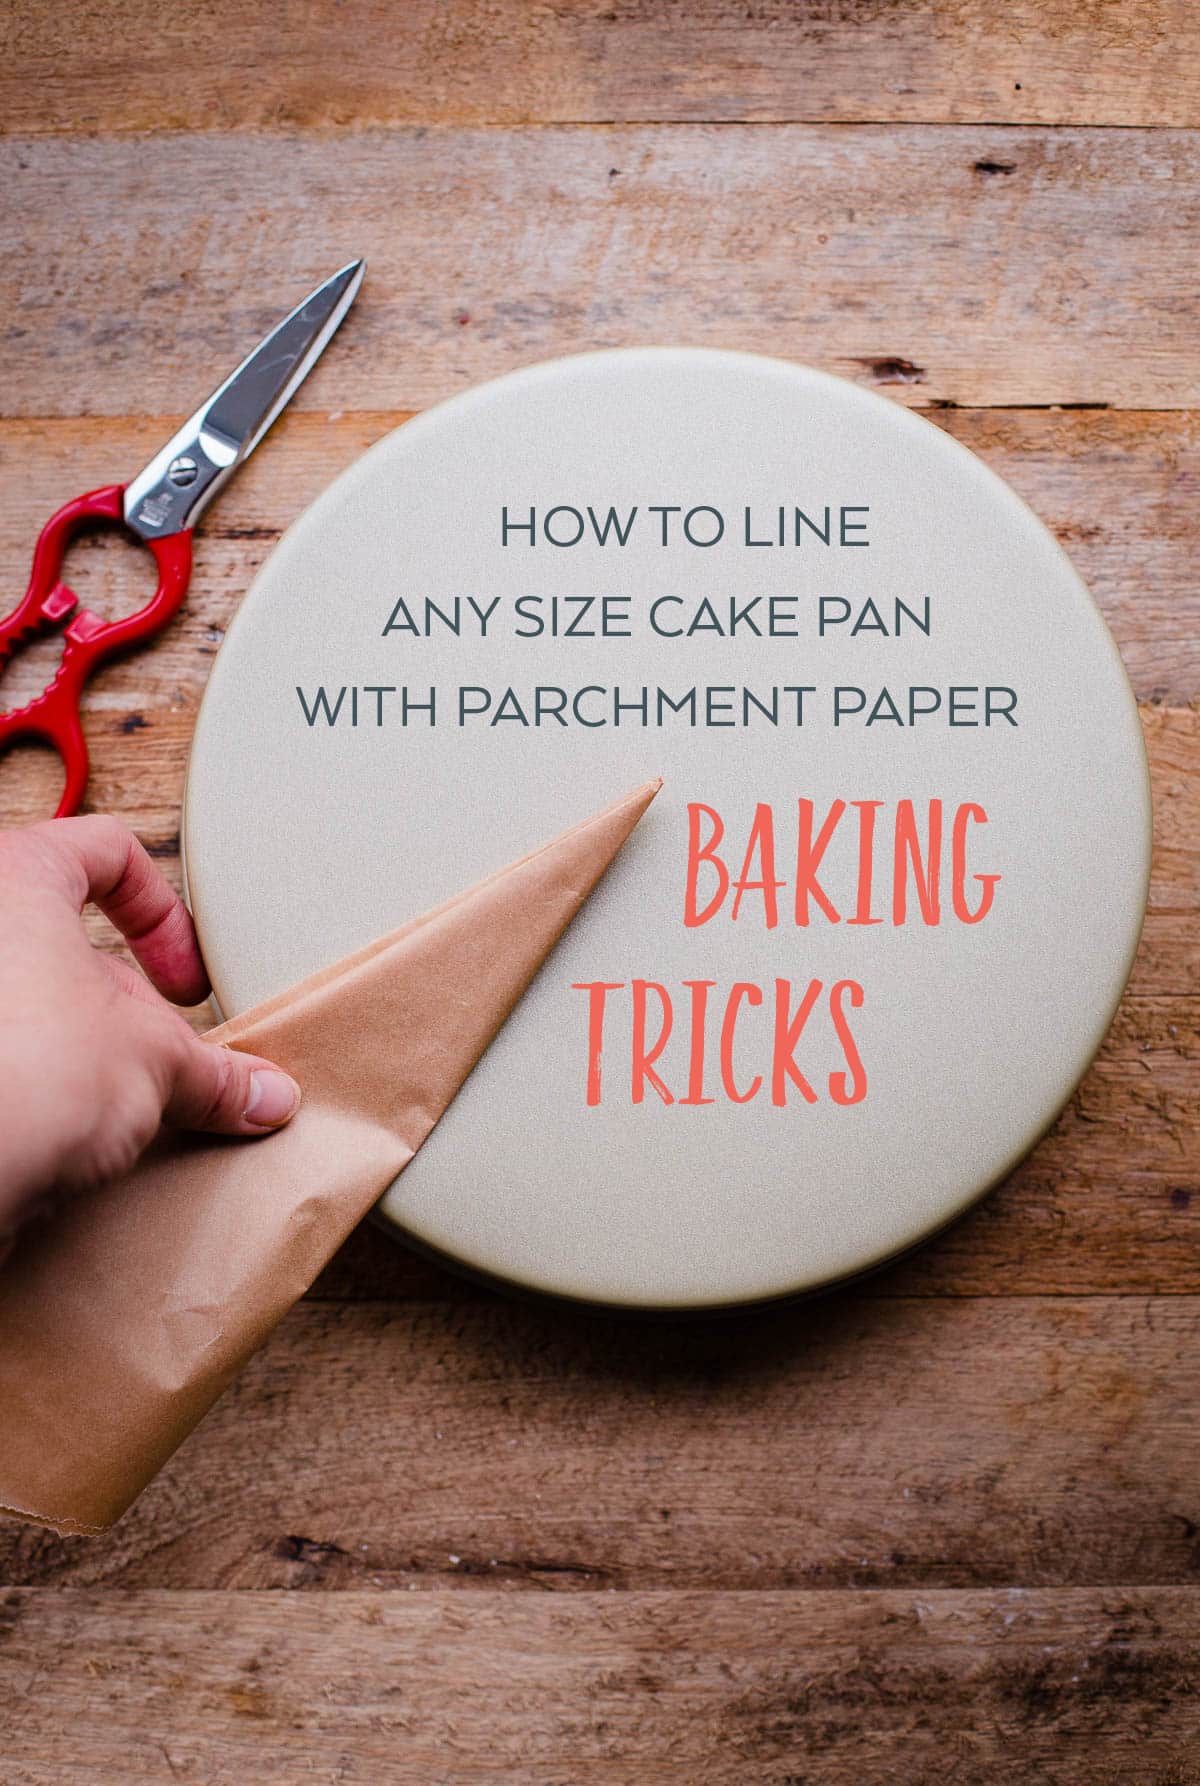 How to Line Pans with Parchment Paper - Always Eat Dessert